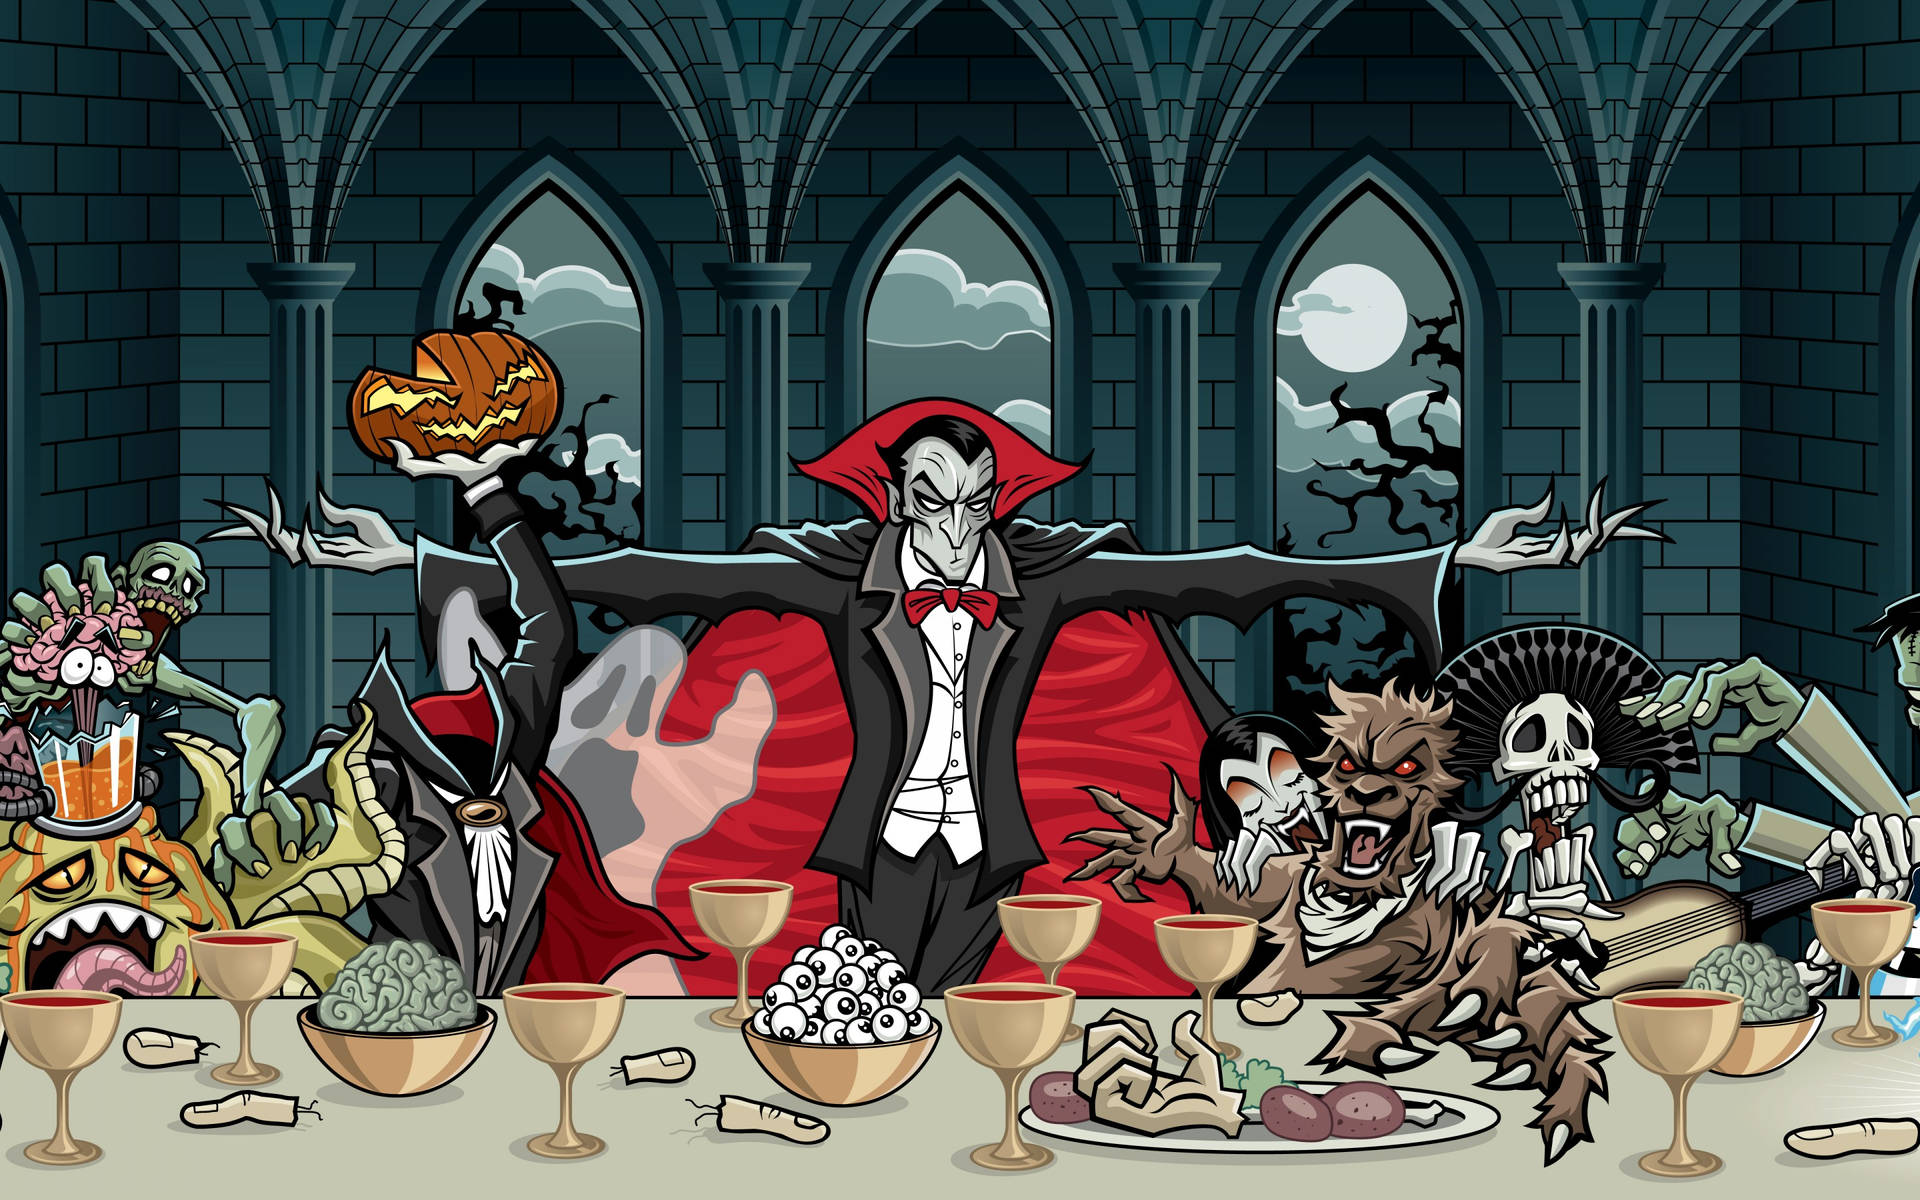 Dracula, Skeleton, vampire and pumpkins on a feast on haunted house on all hallow's eve